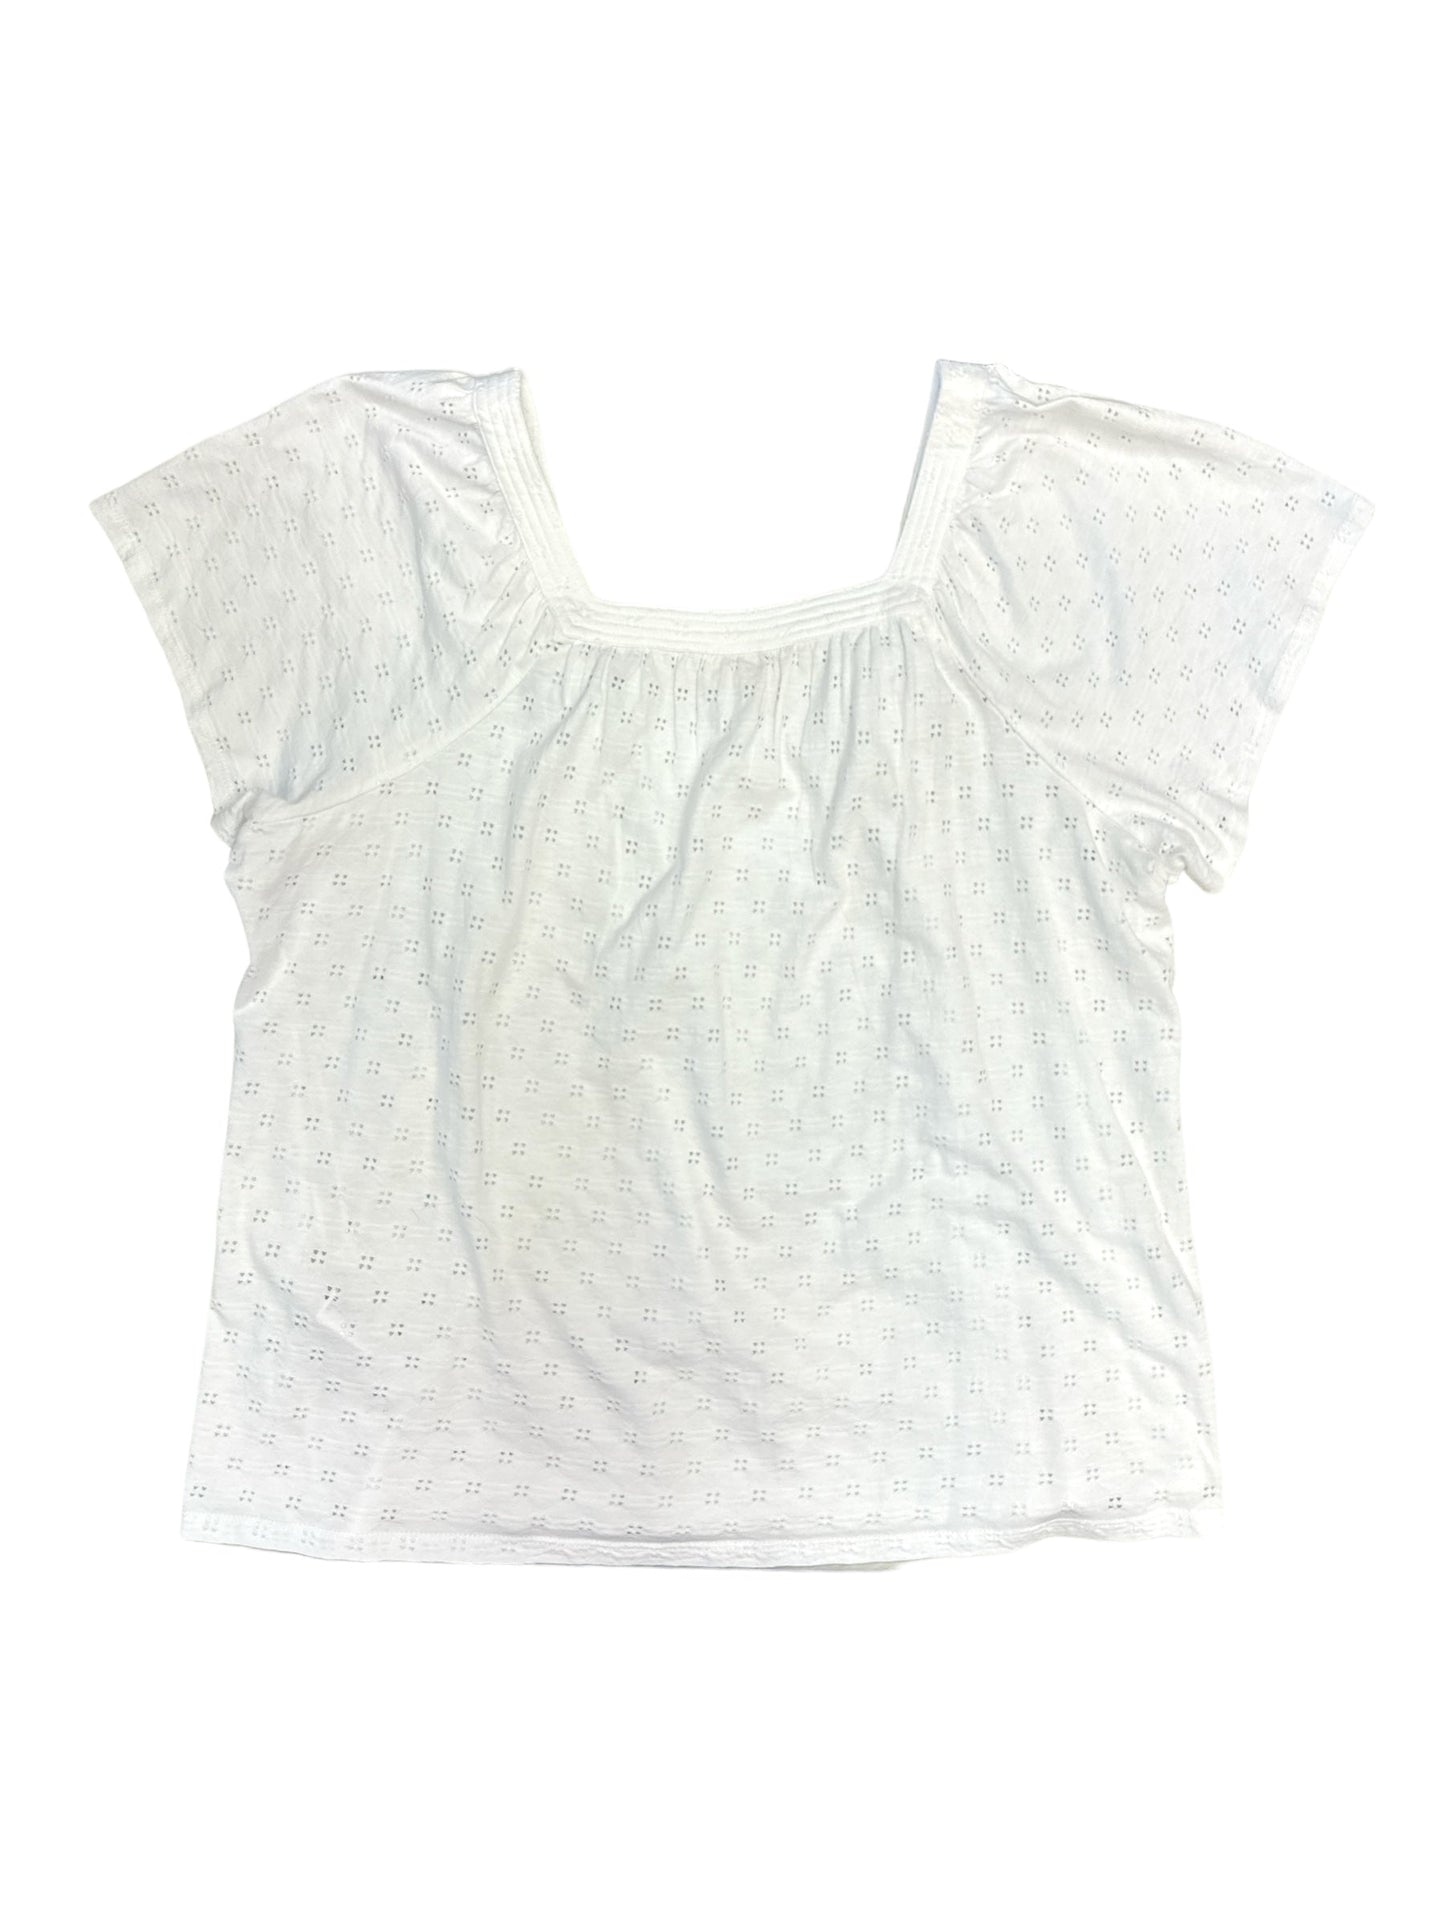 White Top Short Sleeve Style And Company, Size 2x